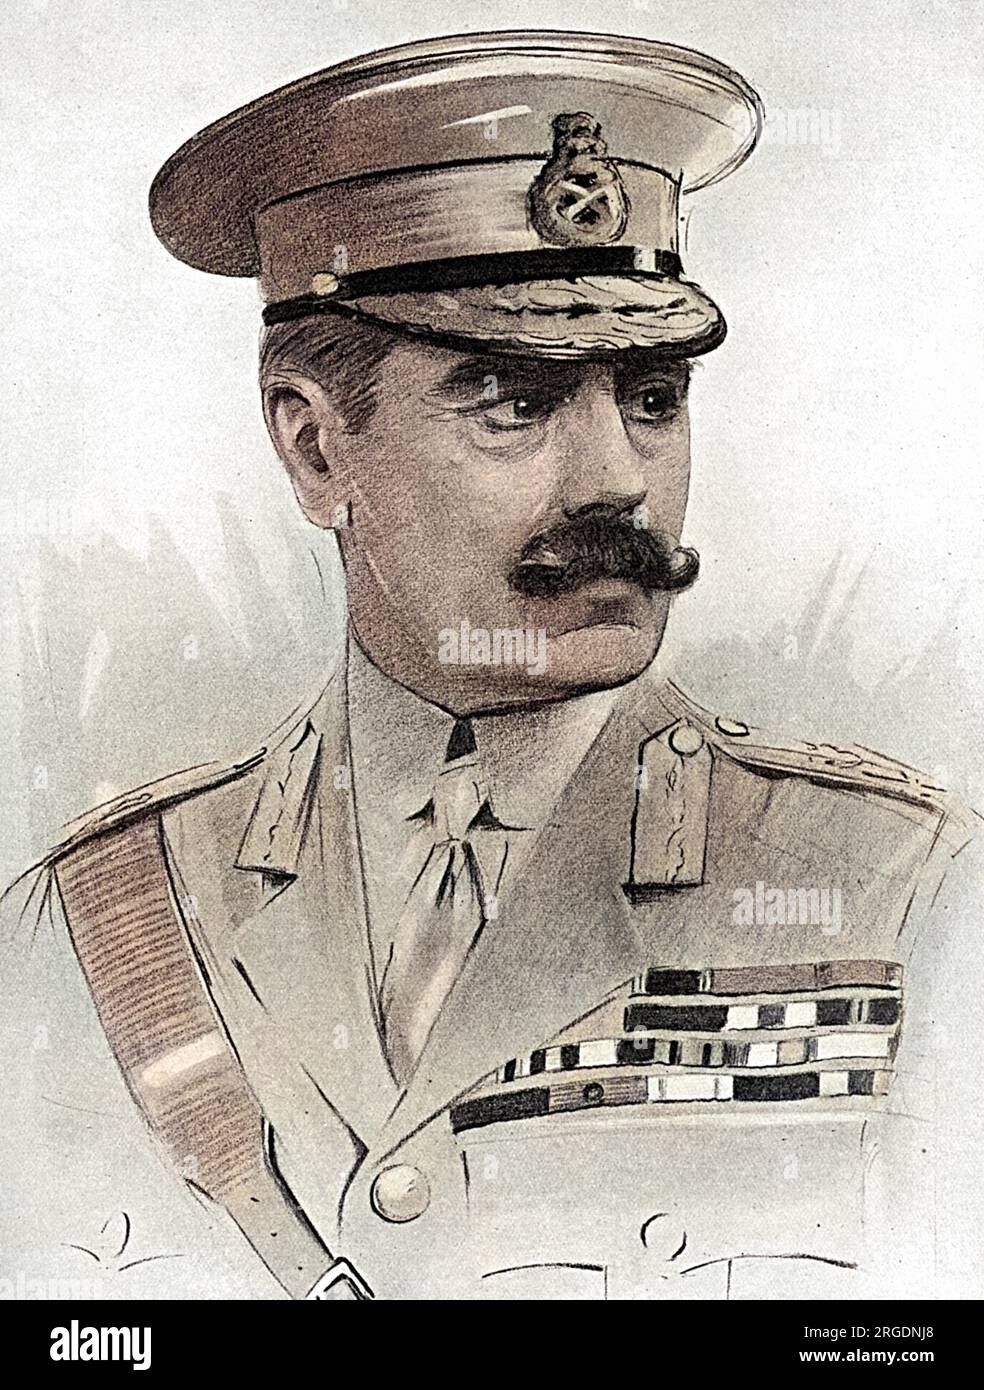 Lieutenant General Sir Francis Lloyd GCVO KCB DSO (12 August 1853 – 26 February 1926), British army officer. He rose to become Major-General commanding the Brigade of Guards and General Officer Commanding London District.  Was responsible for the defence of London during the First World War, particularly from Zeppelin attack. Stock Photo